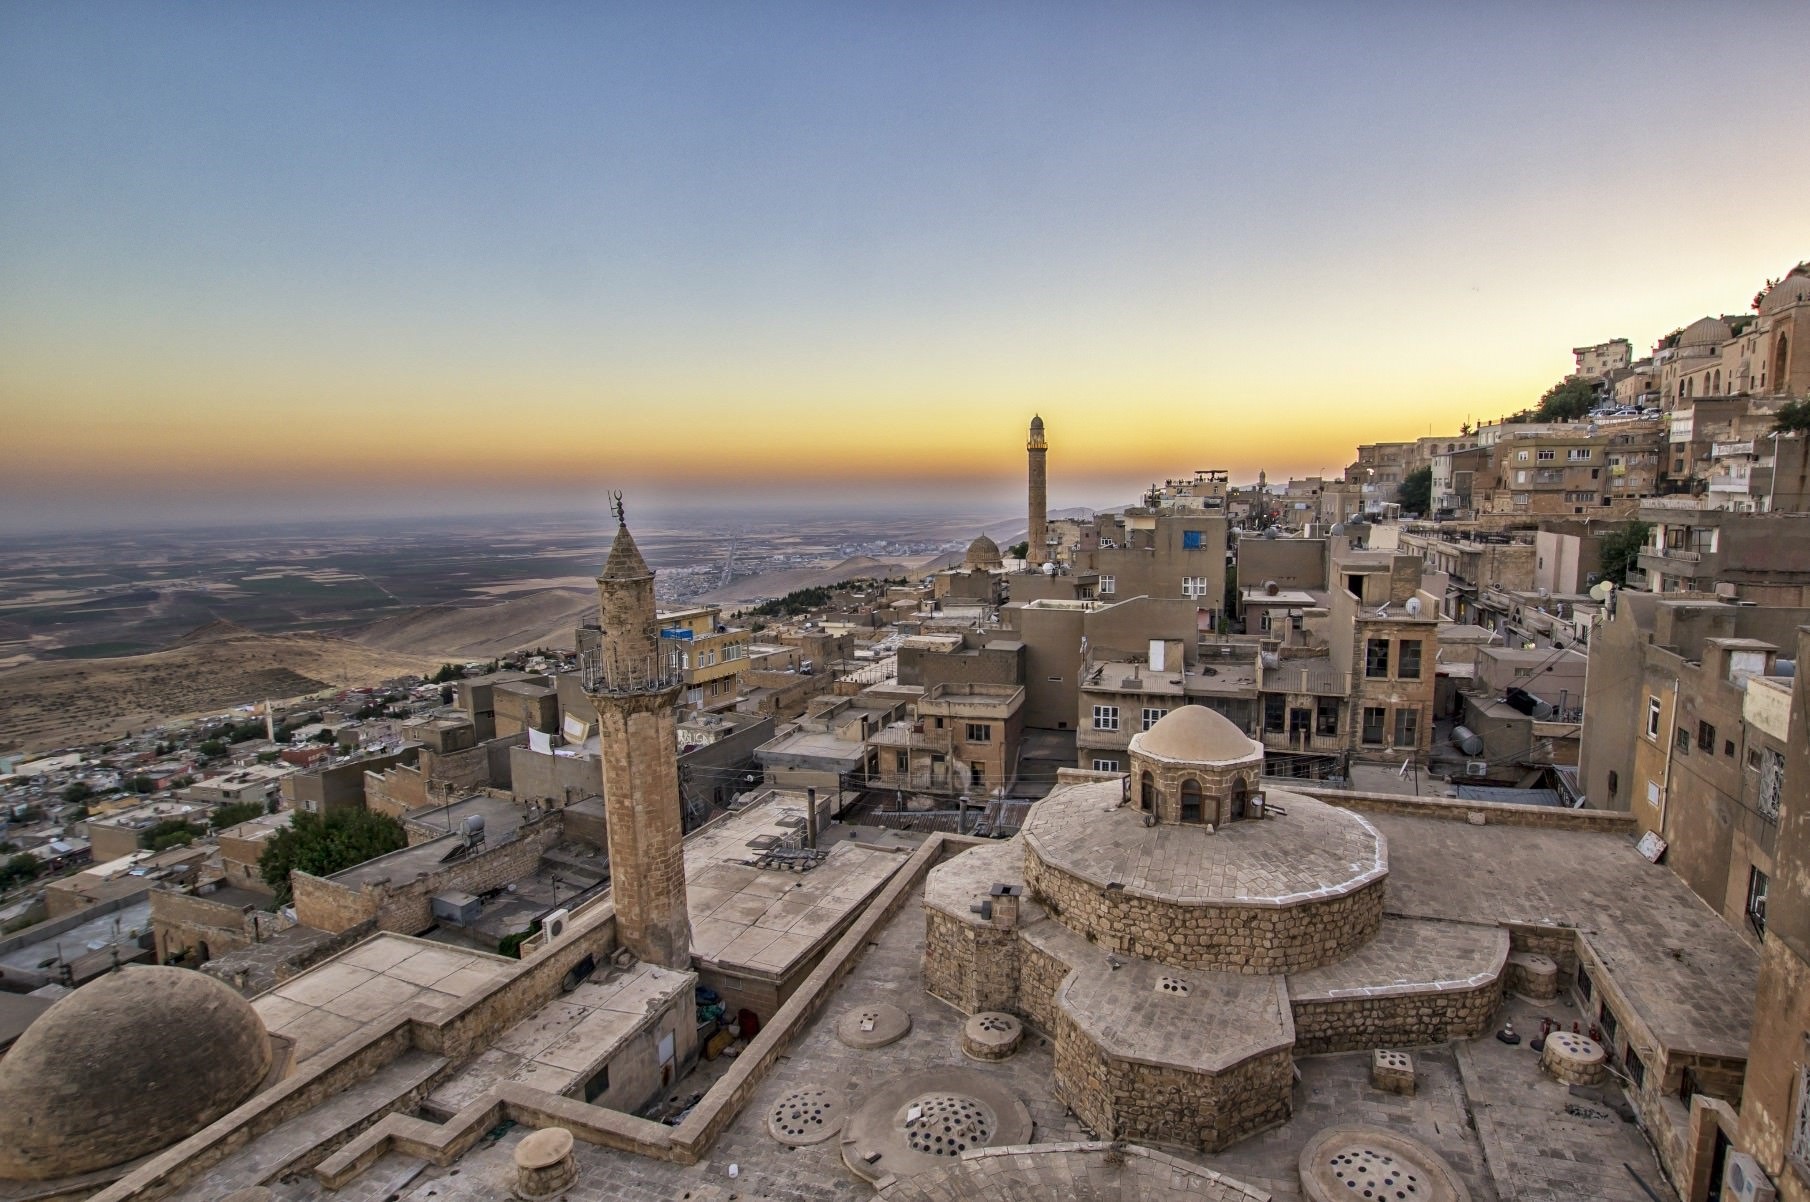 Situated in the endless Mesopotamian plain, Mardin mesmerizes its visitors in every turn with its narrow streets and stone houses.